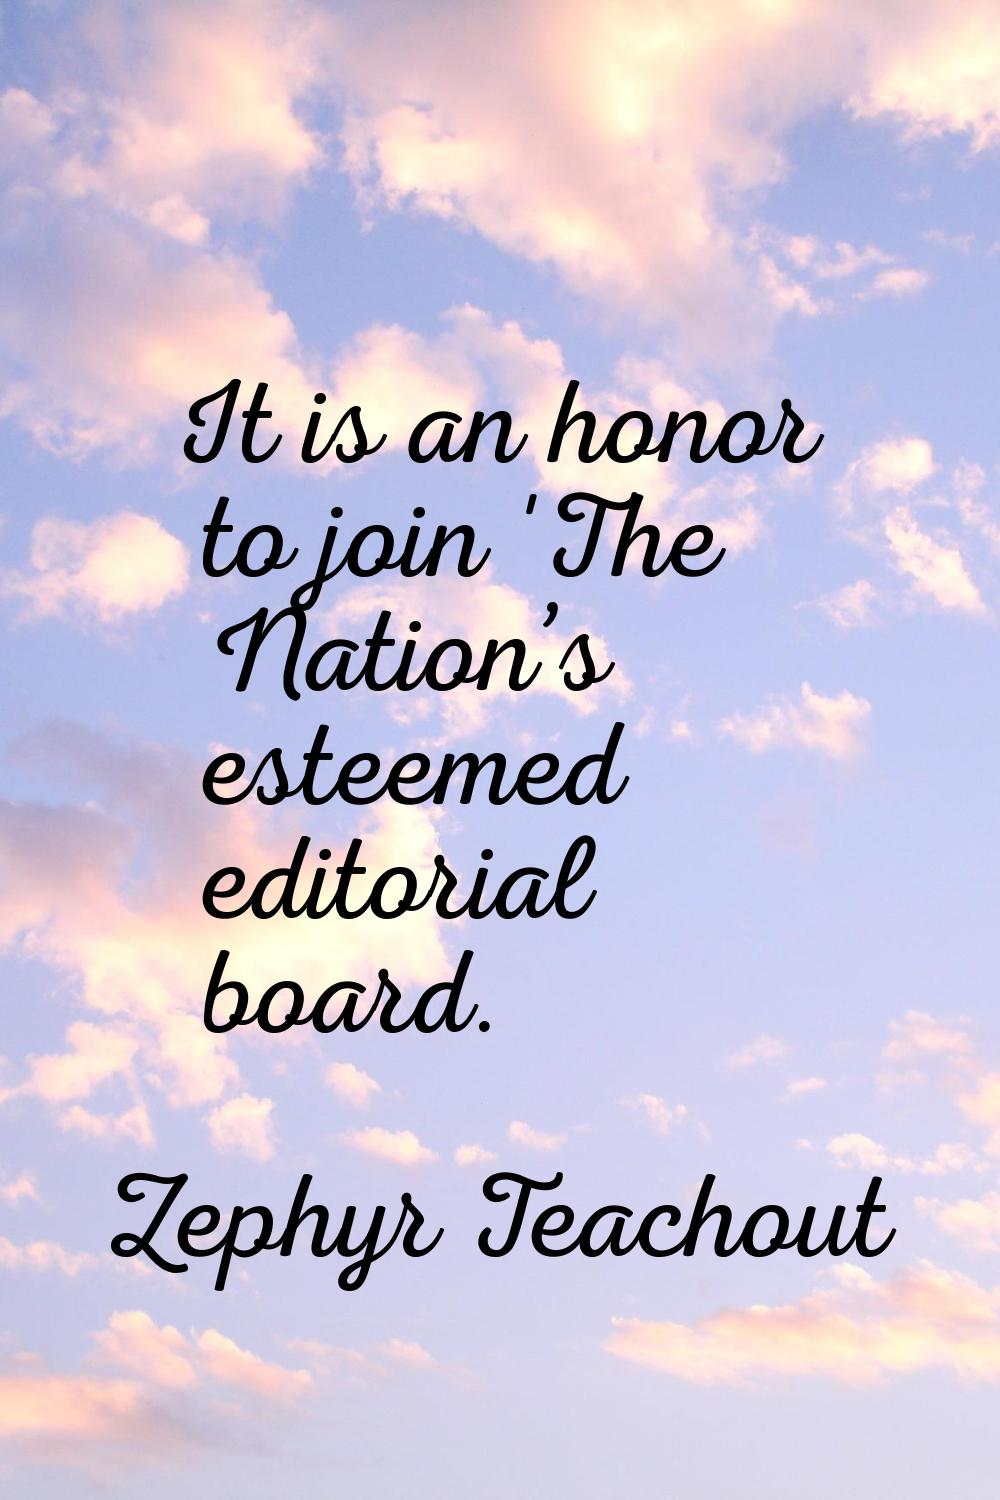 It is an honor to join 'The Nation’s esteemed editorial board.